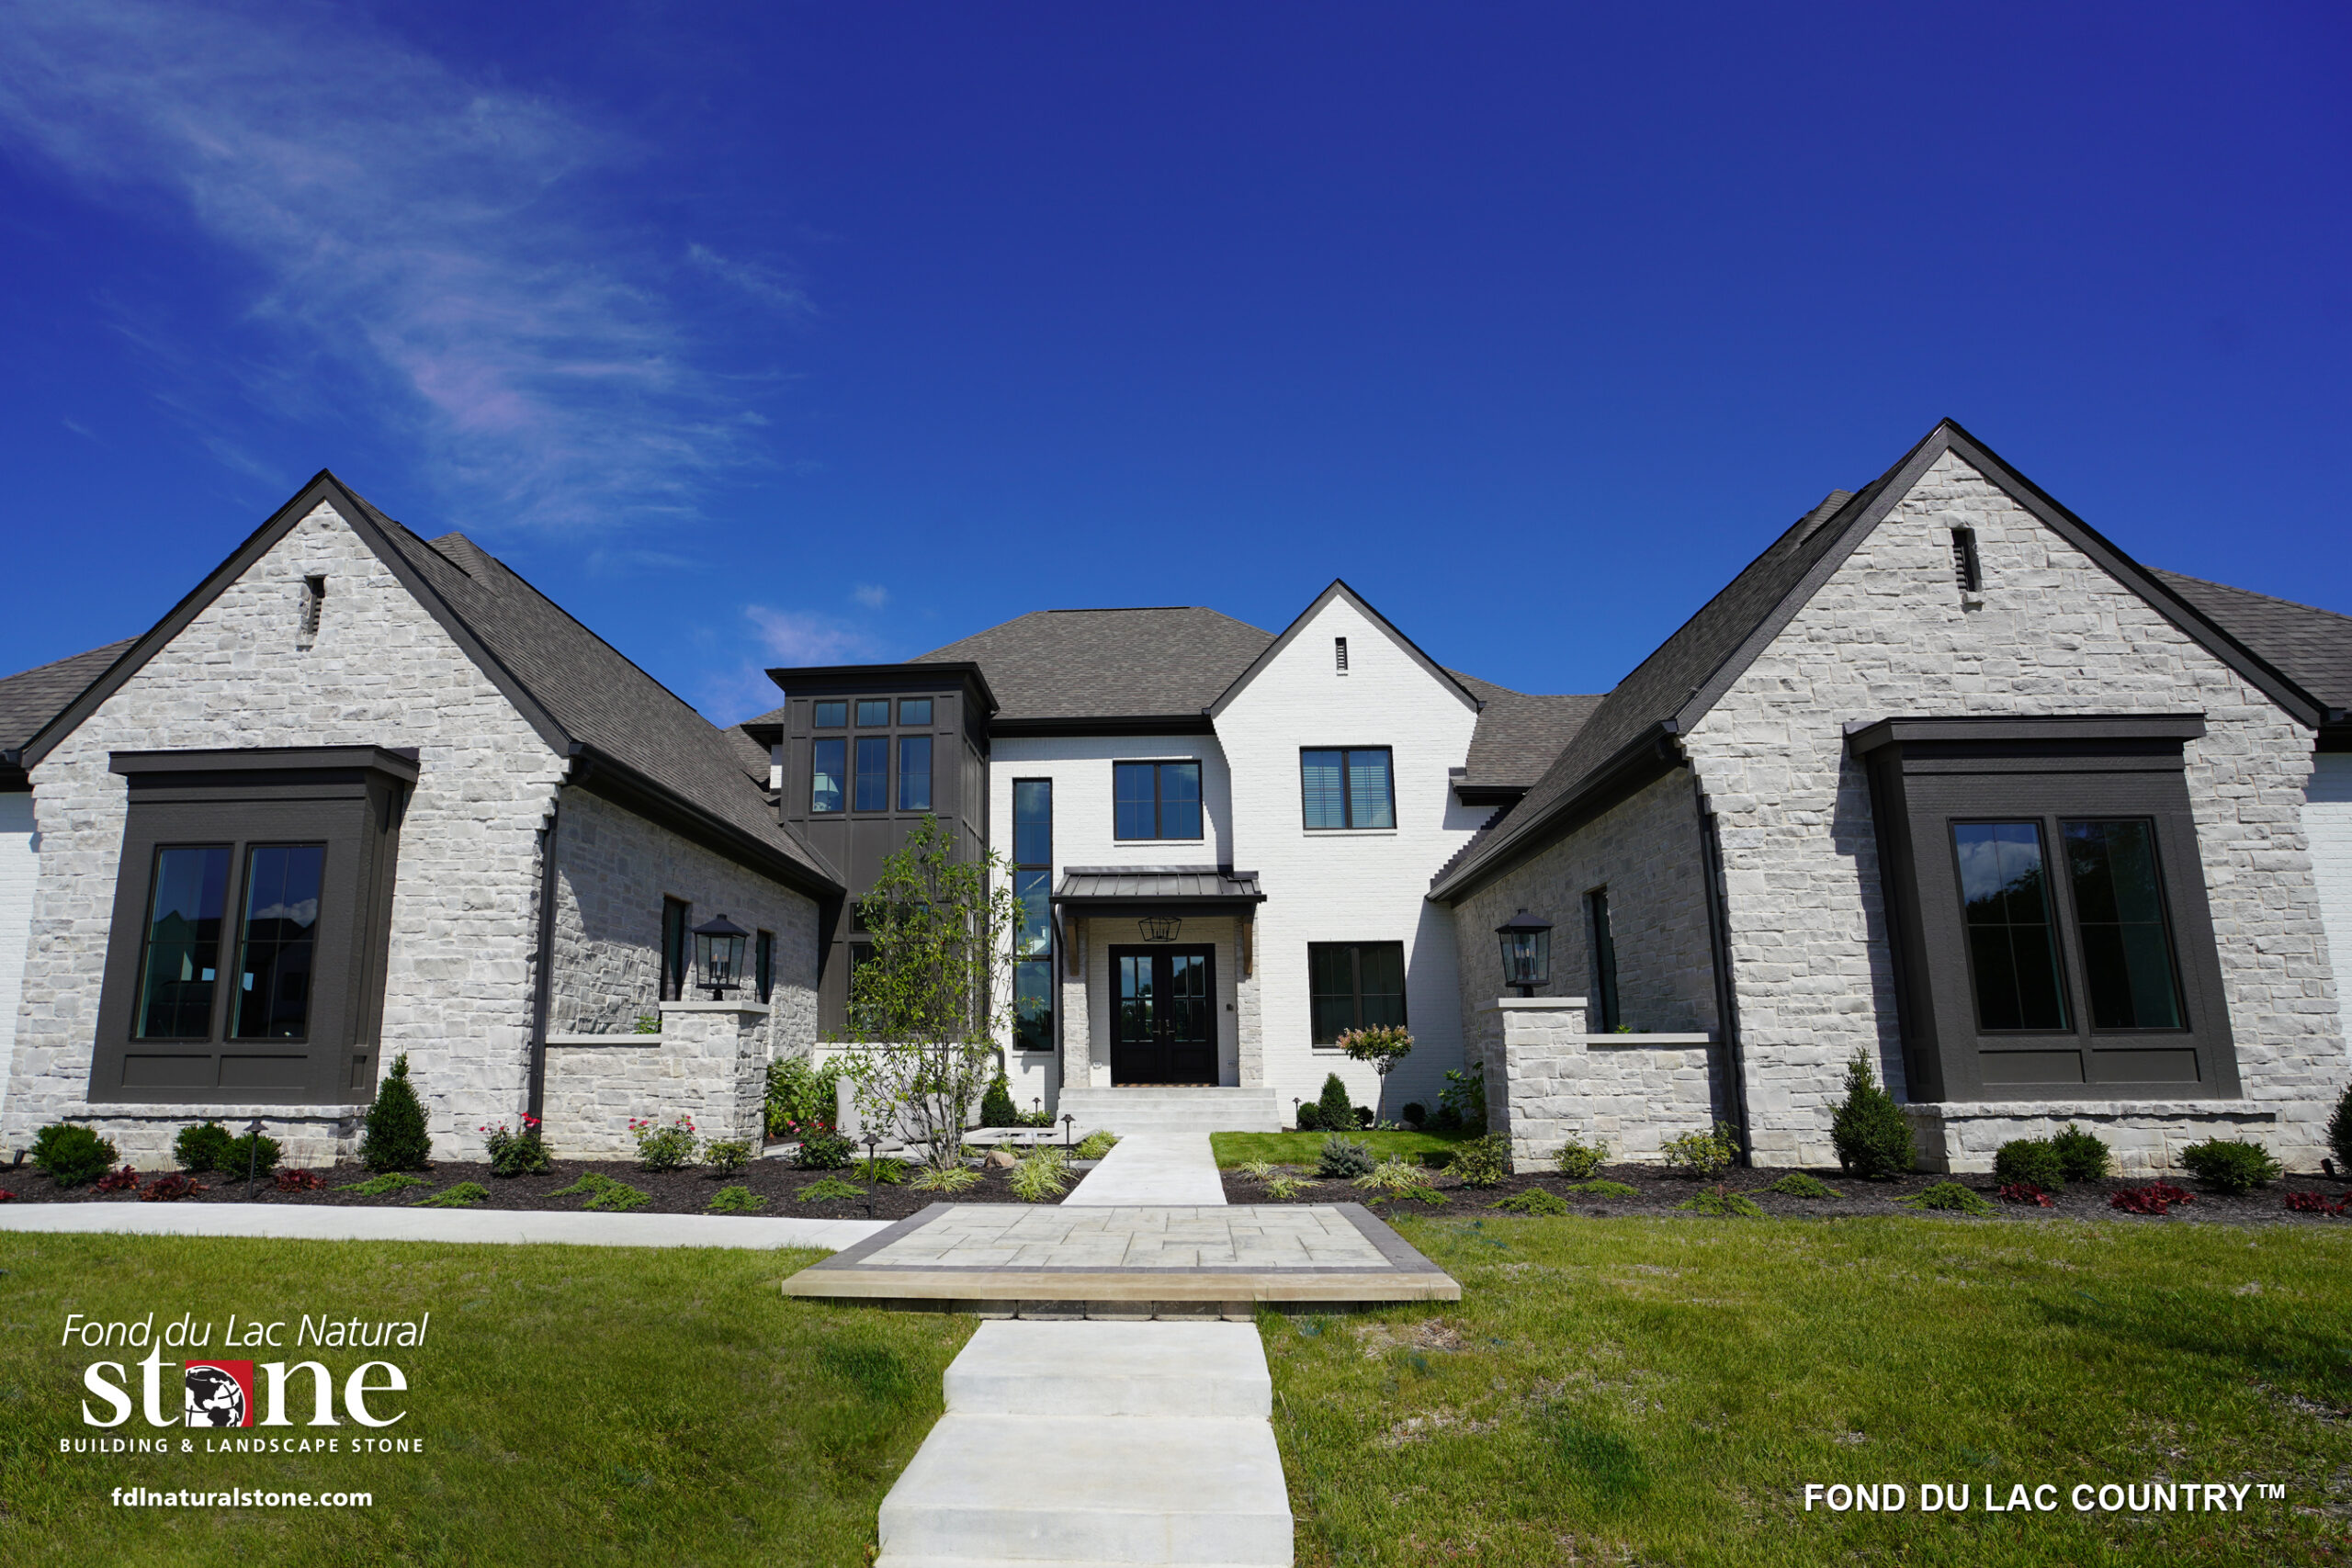 Fond du Lac Country™ - Residential Exterior - Fond du Lac Natural